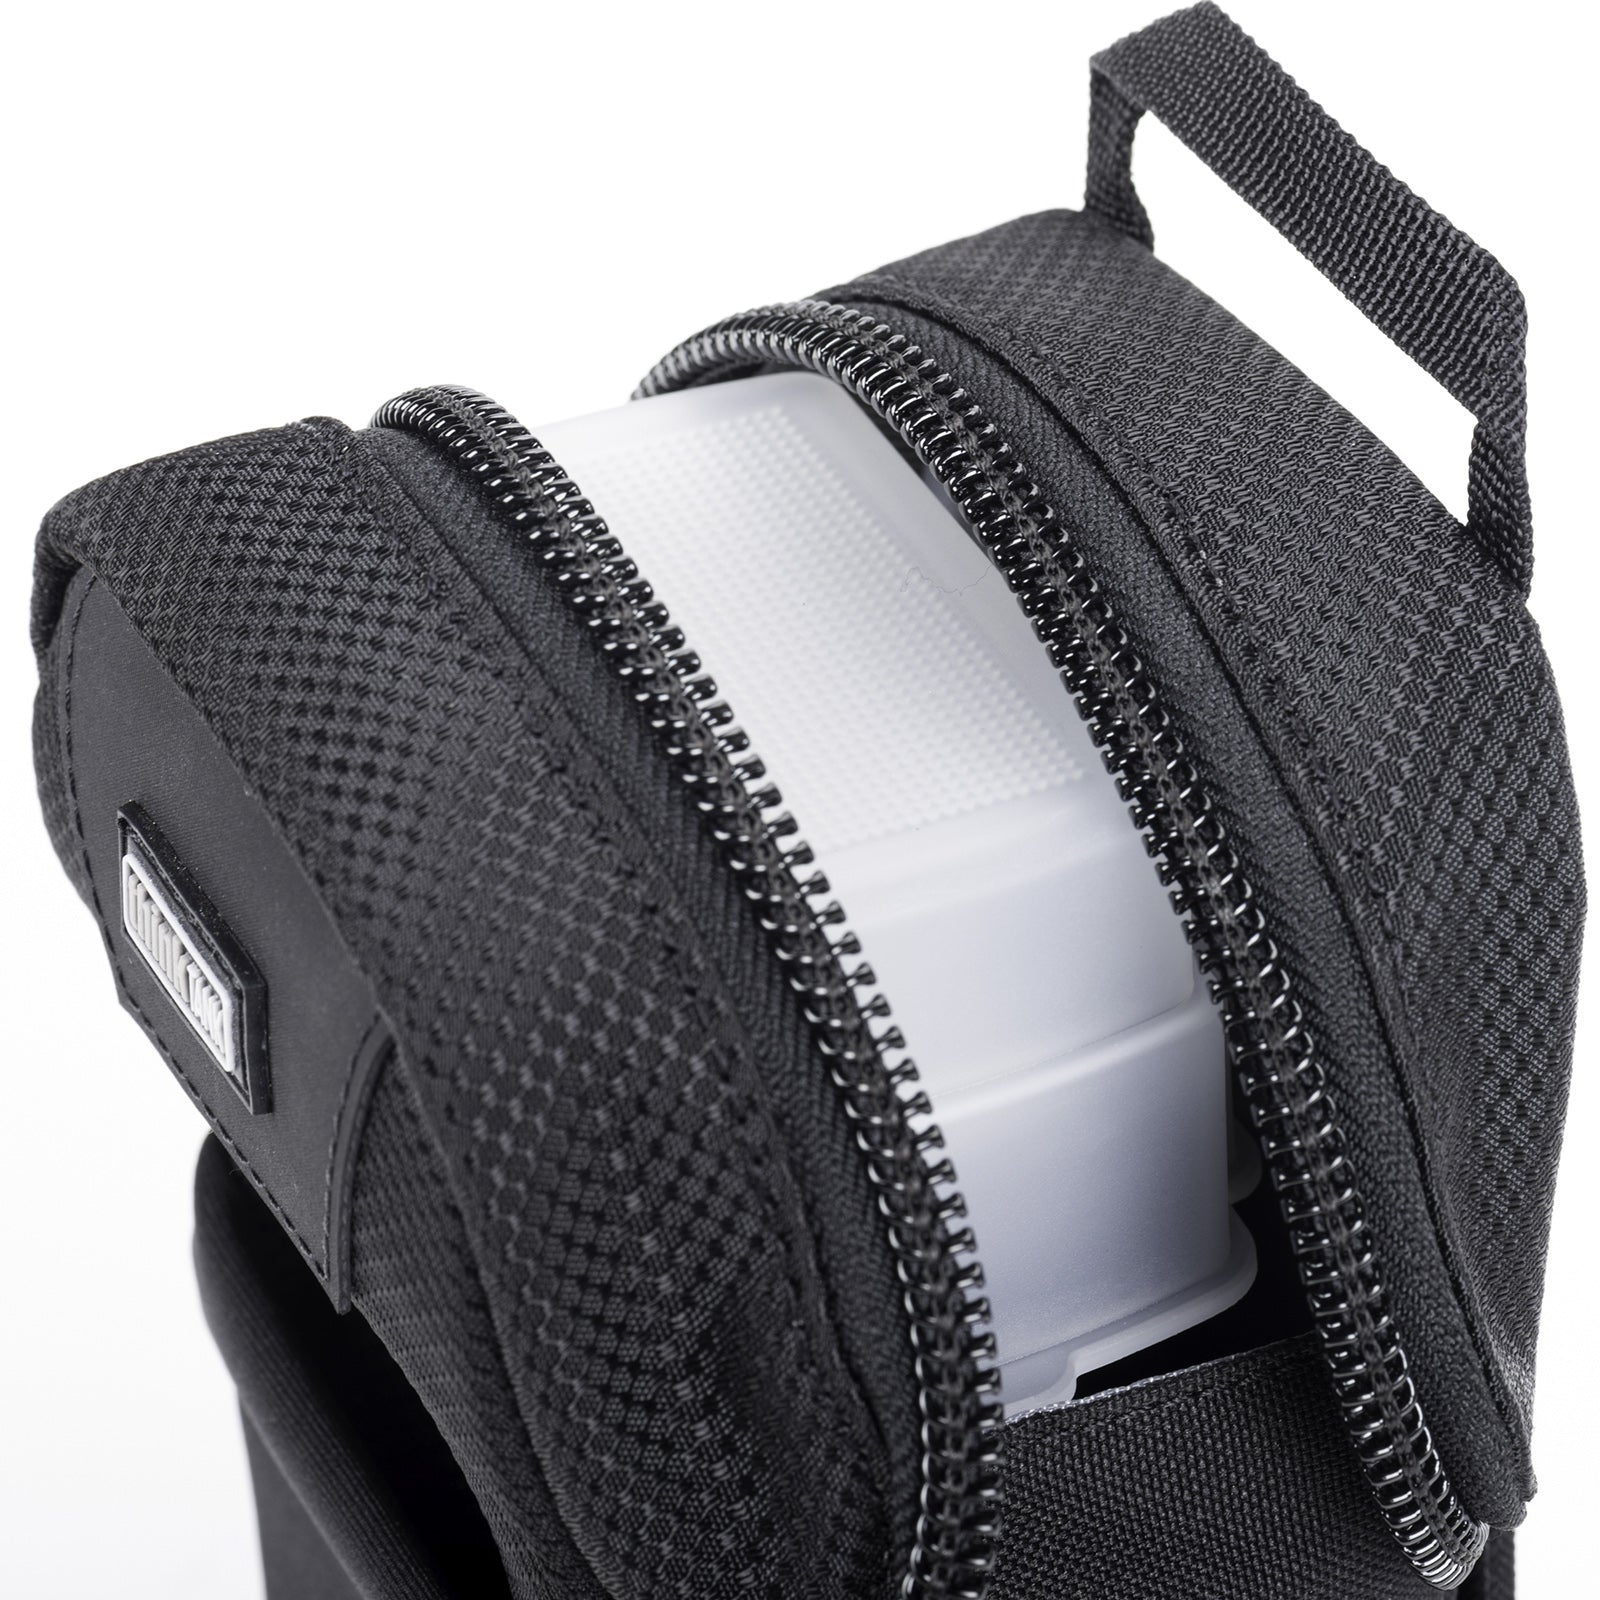 Belt pouch for DSLR flashes with attached diffuser